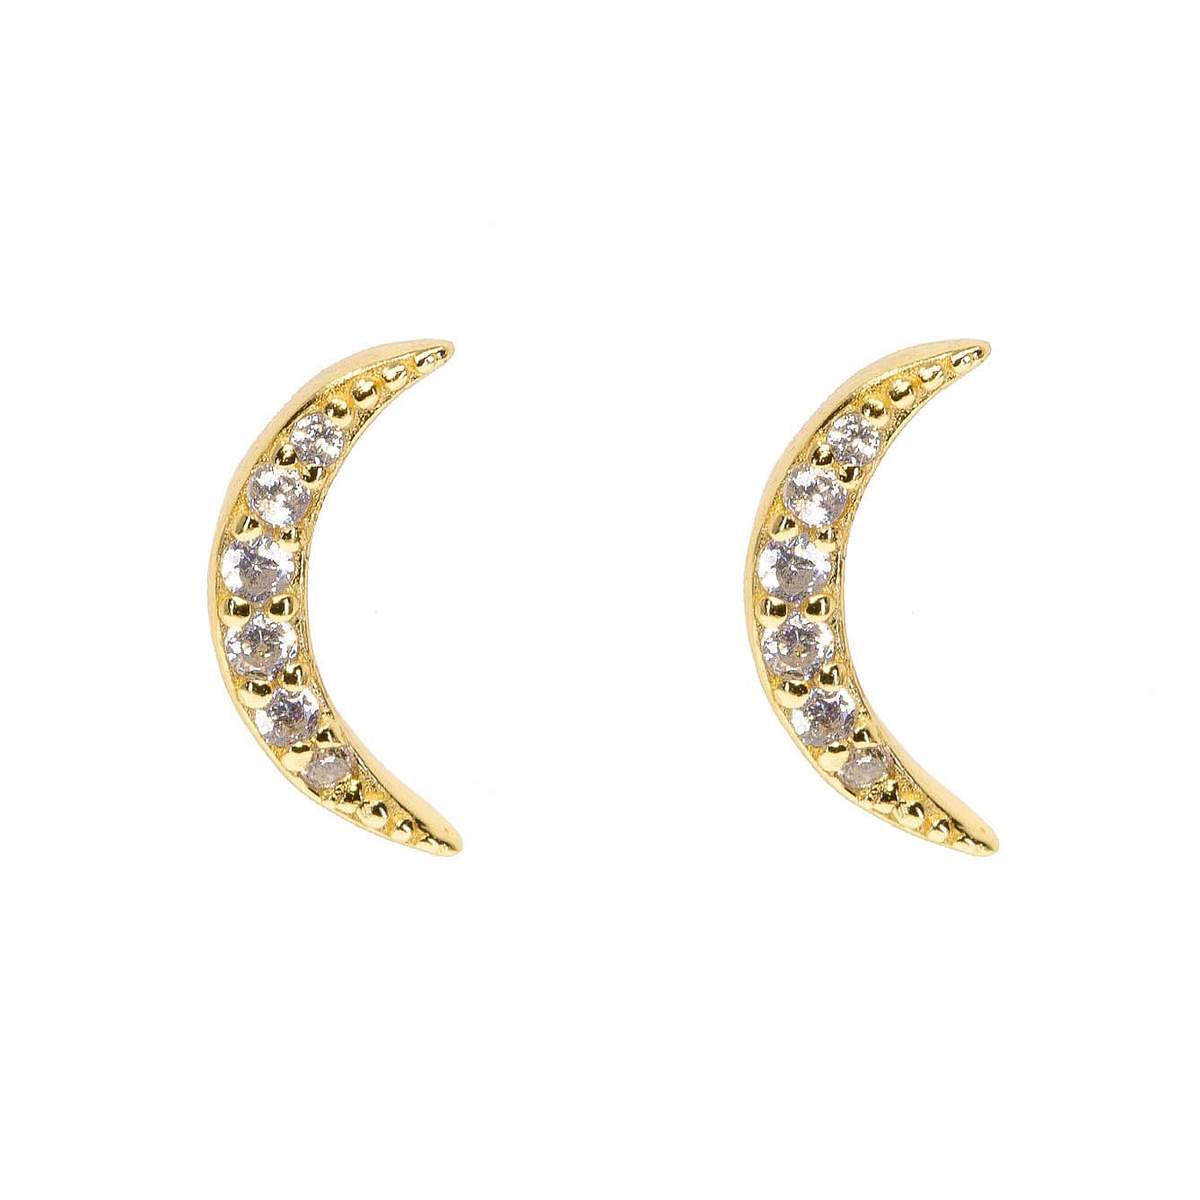 New Crescent Moon Stud in Crystal Clear